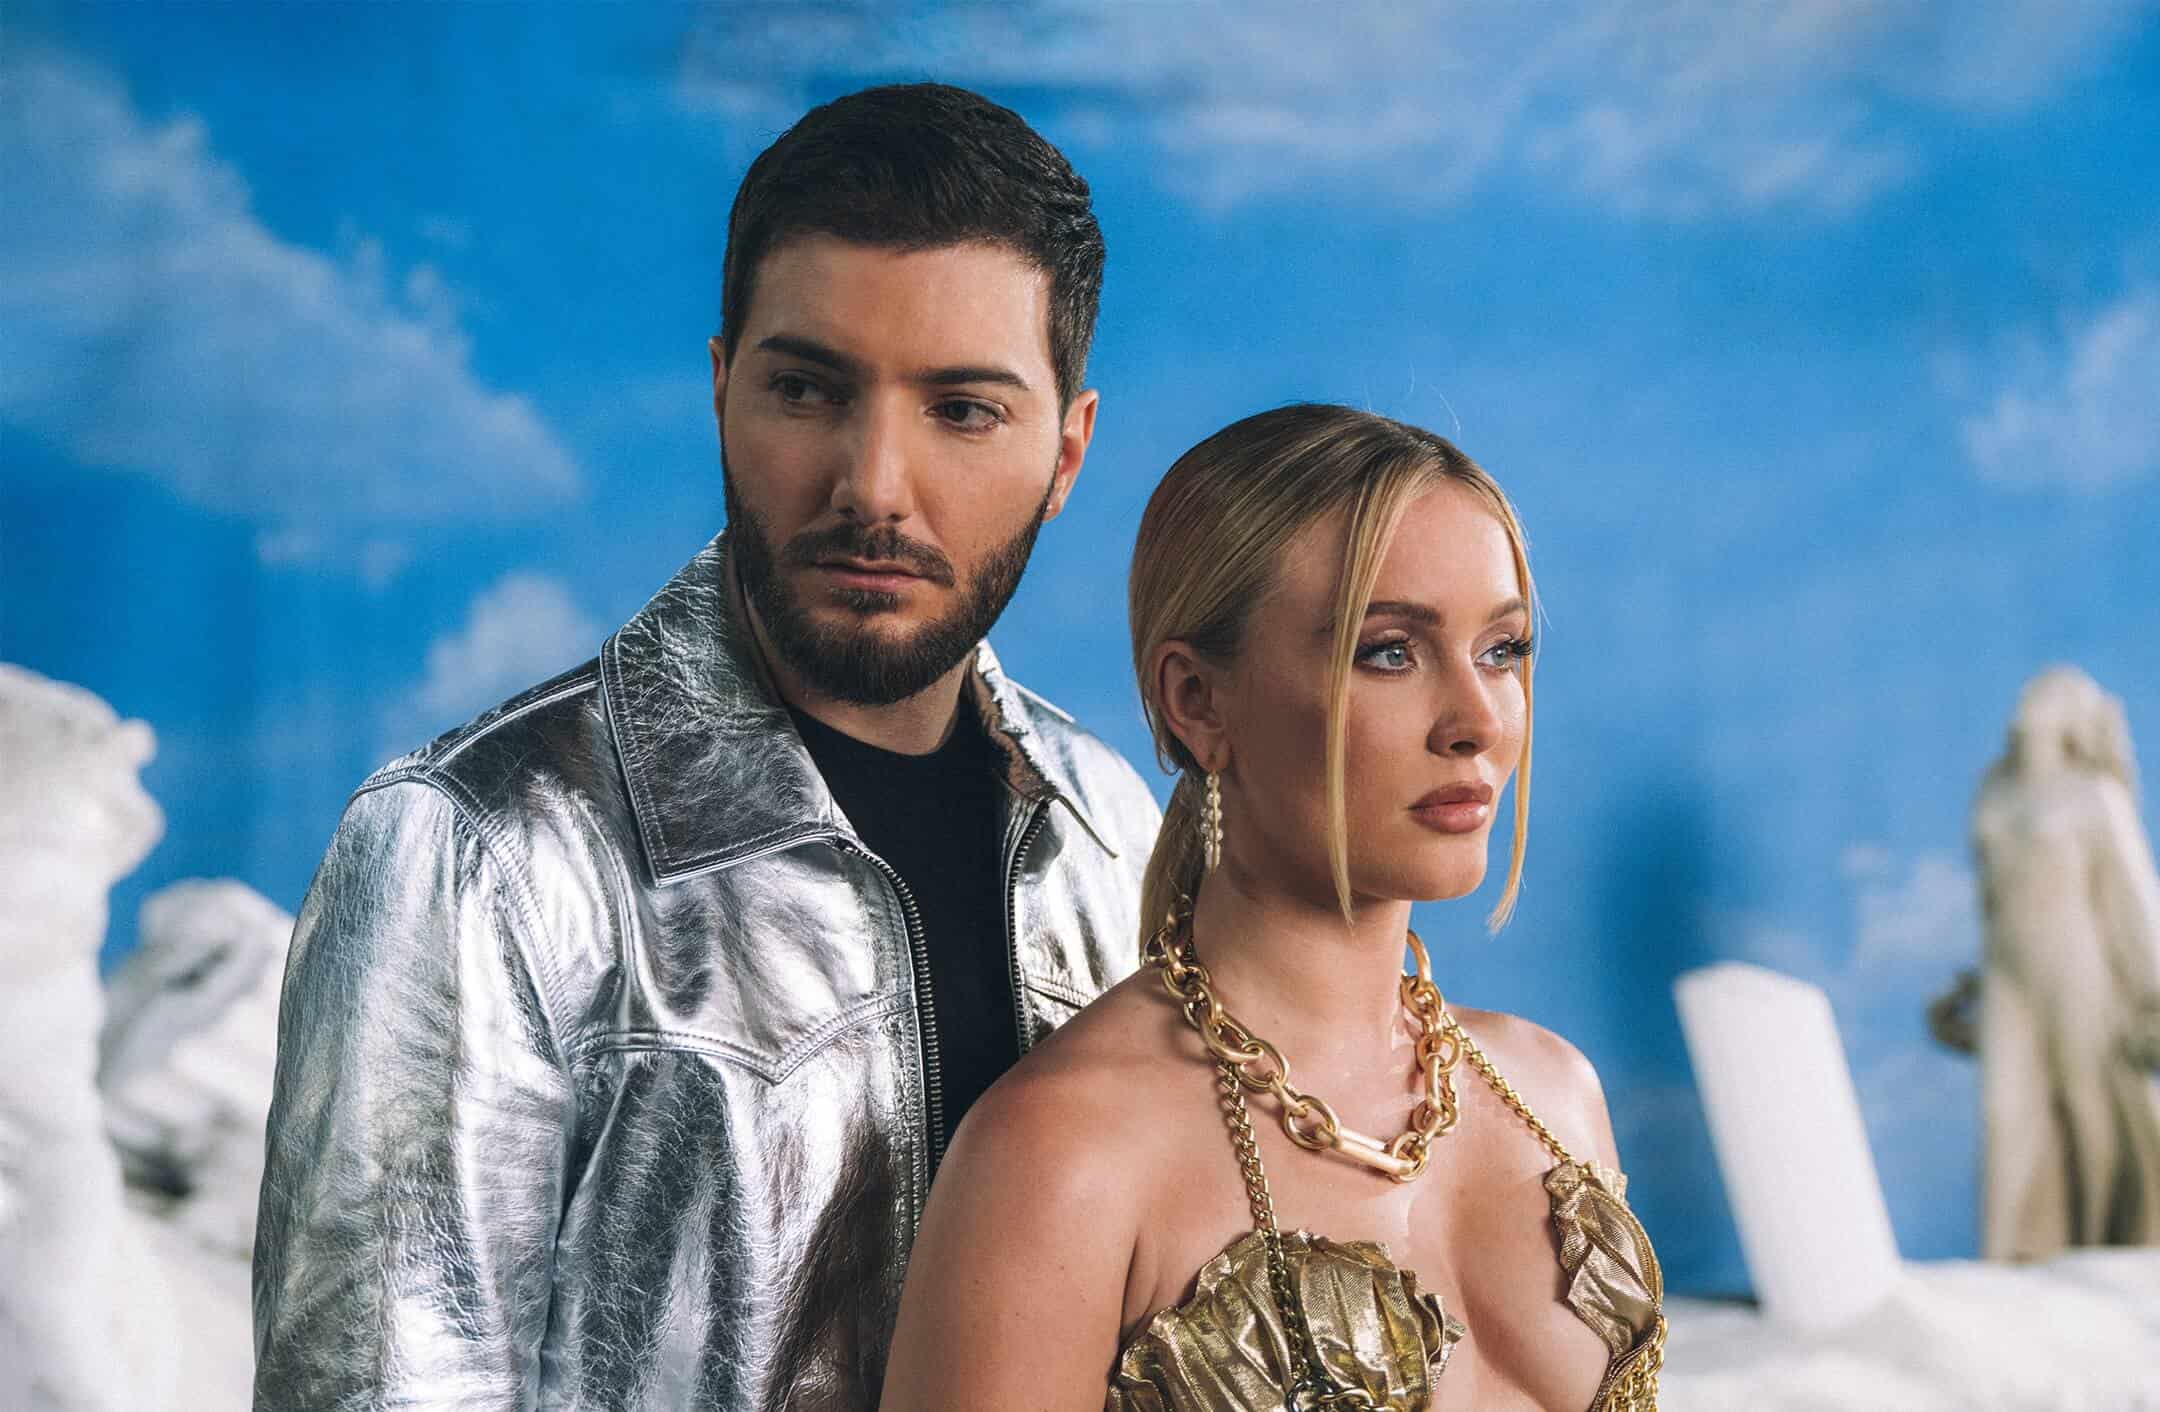 Alesso releases 5 remixes for Zara Larsson collab ‘Words’: Listen